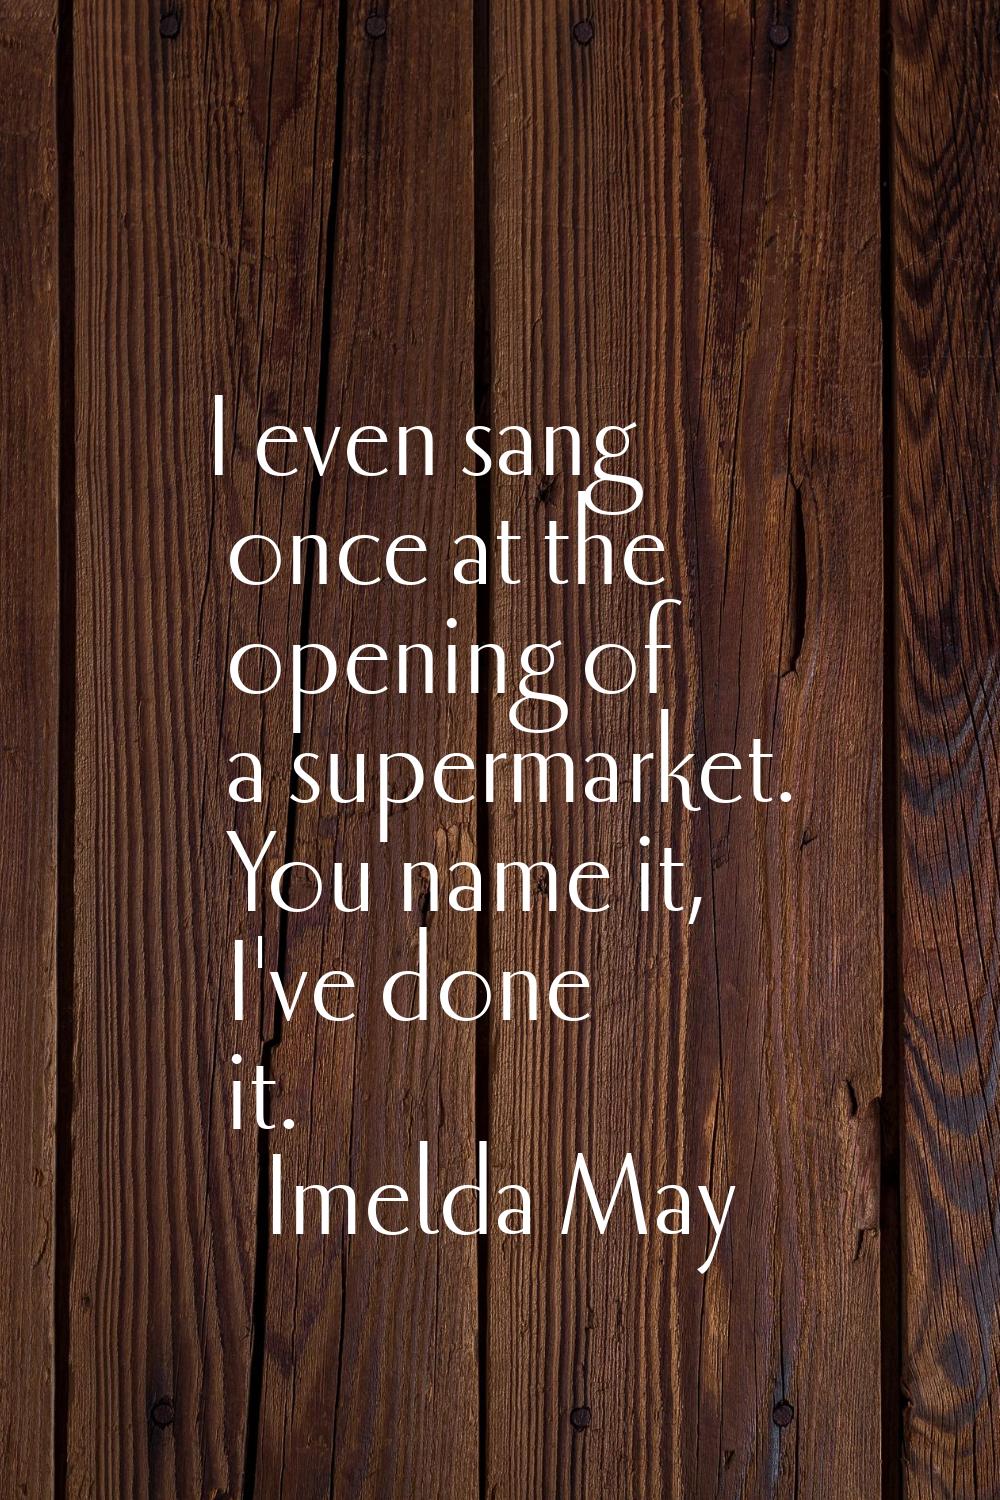 I even sang once at the opening of a supermarket. You name it, I've done it.